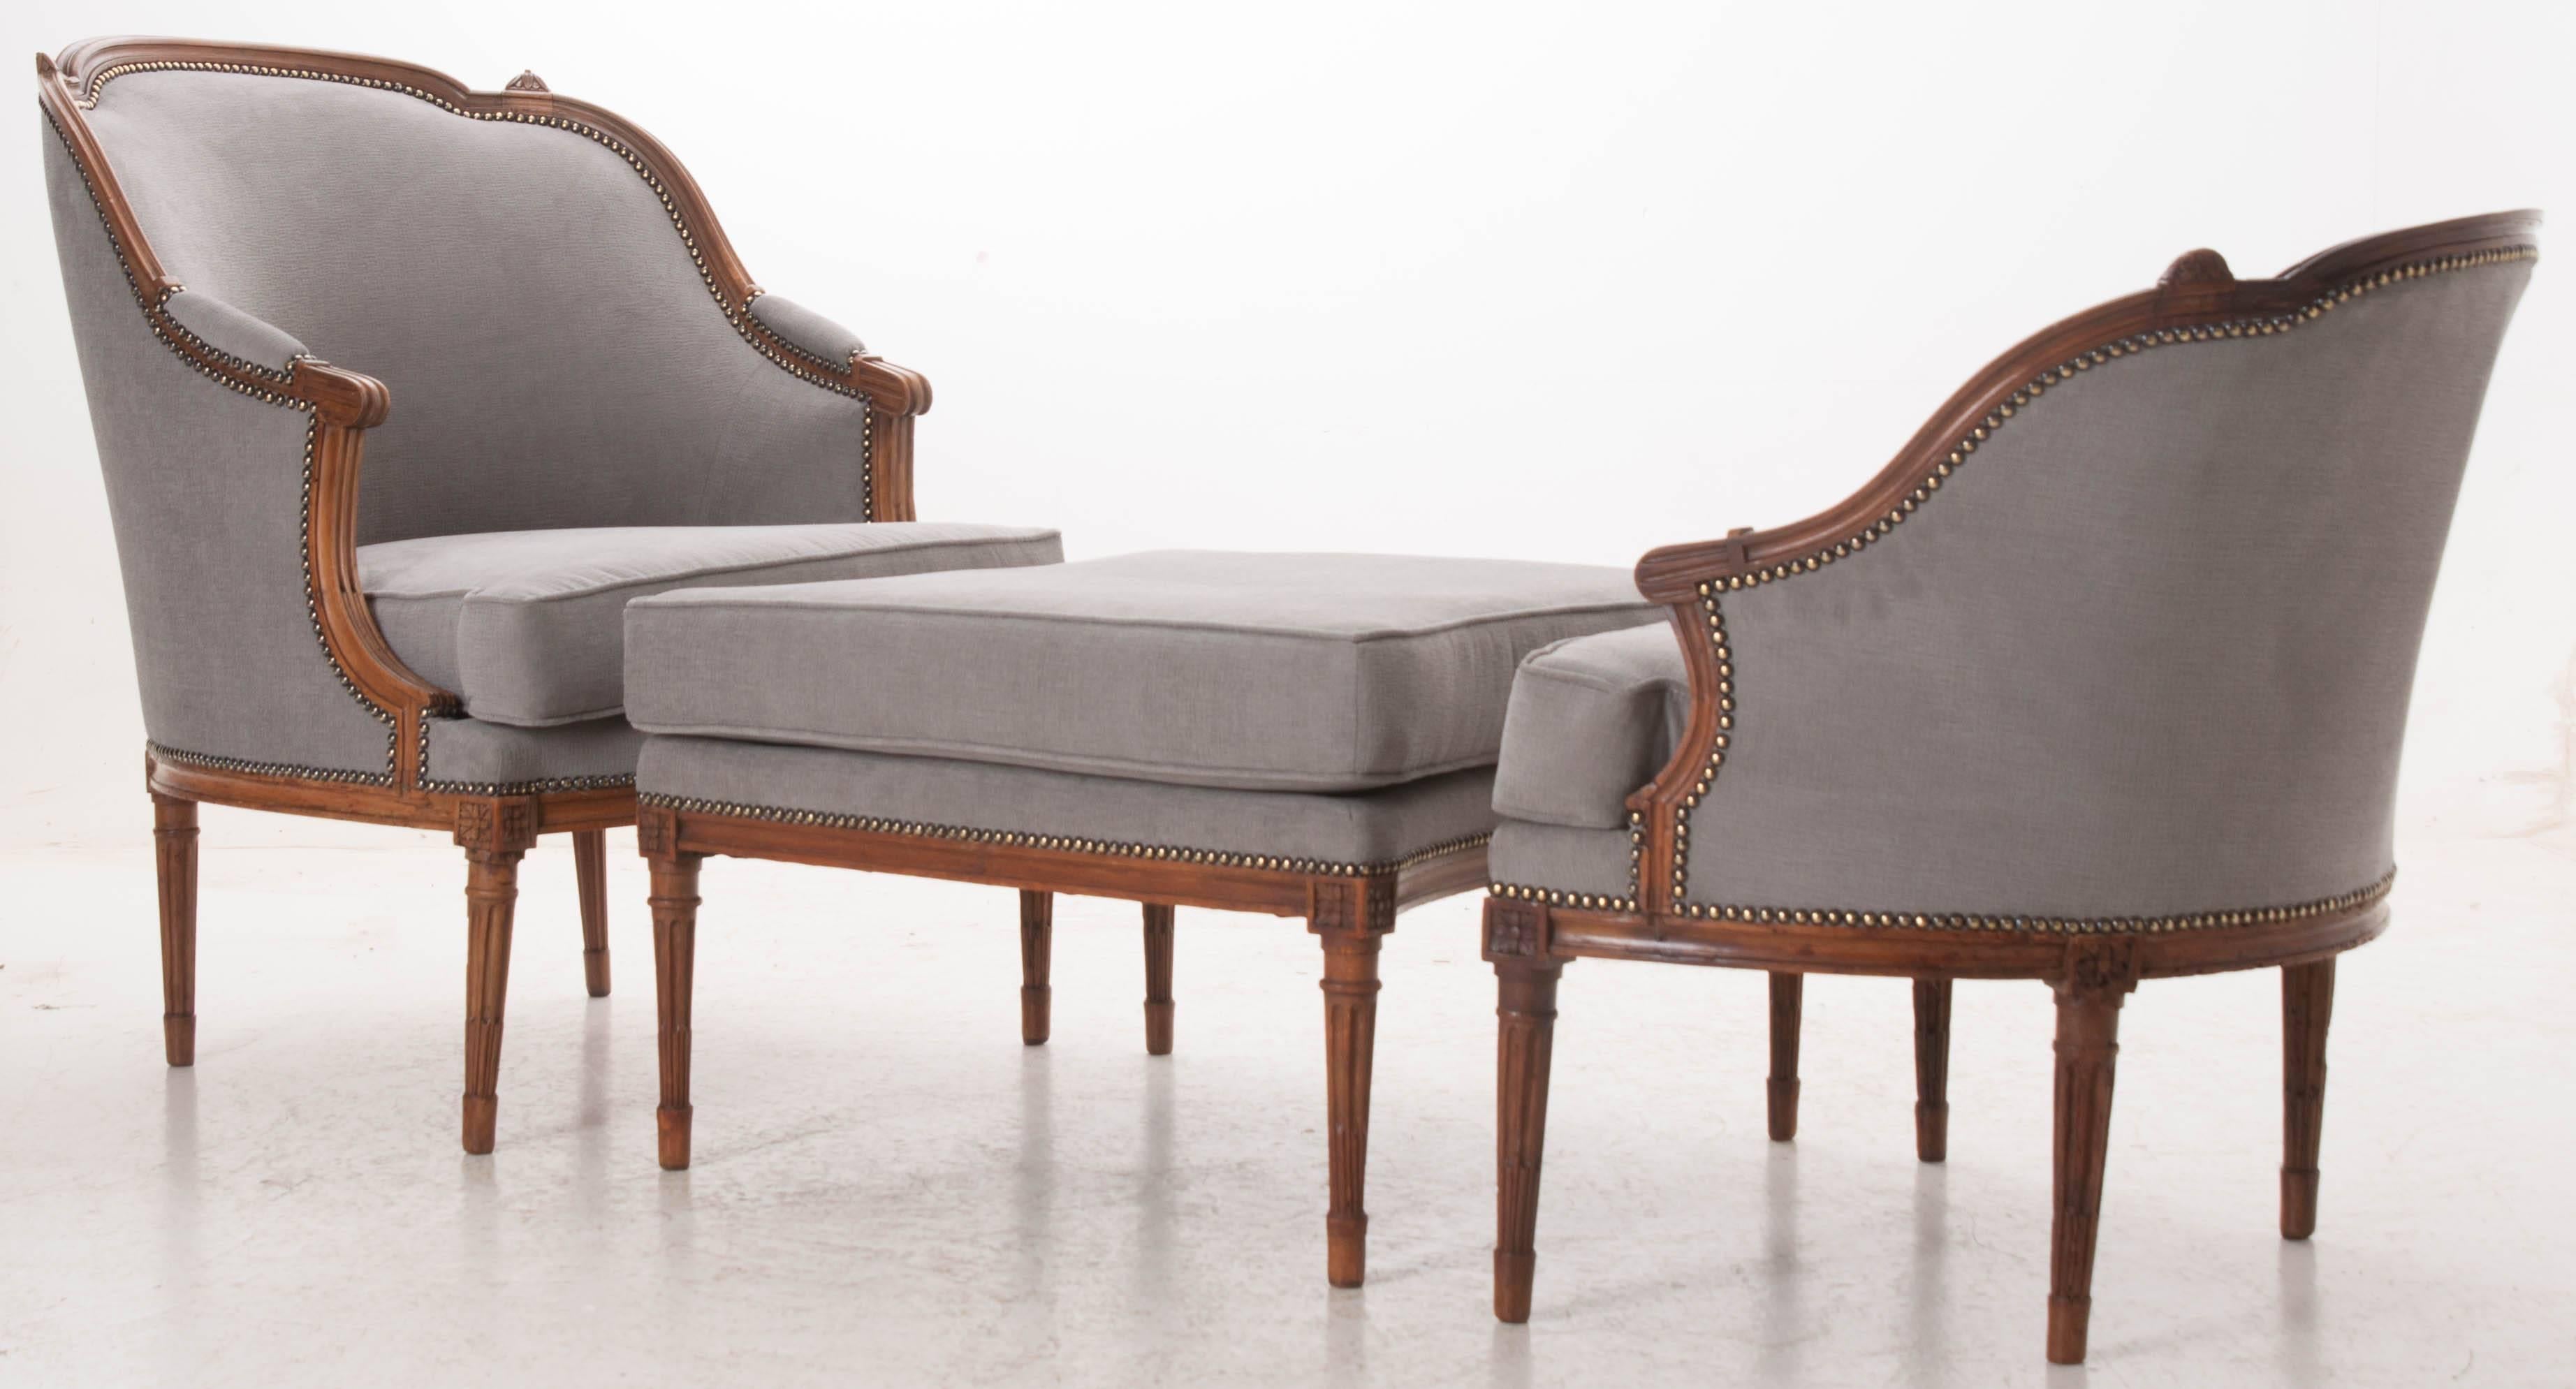 This extraordinary 19th century Louis XVI duchesse brisee has been recently reupholstered in a fabulous gray fabric that works magically with the brilliantly carved walnut frame. Able to be configured into different arrangements, this versatile